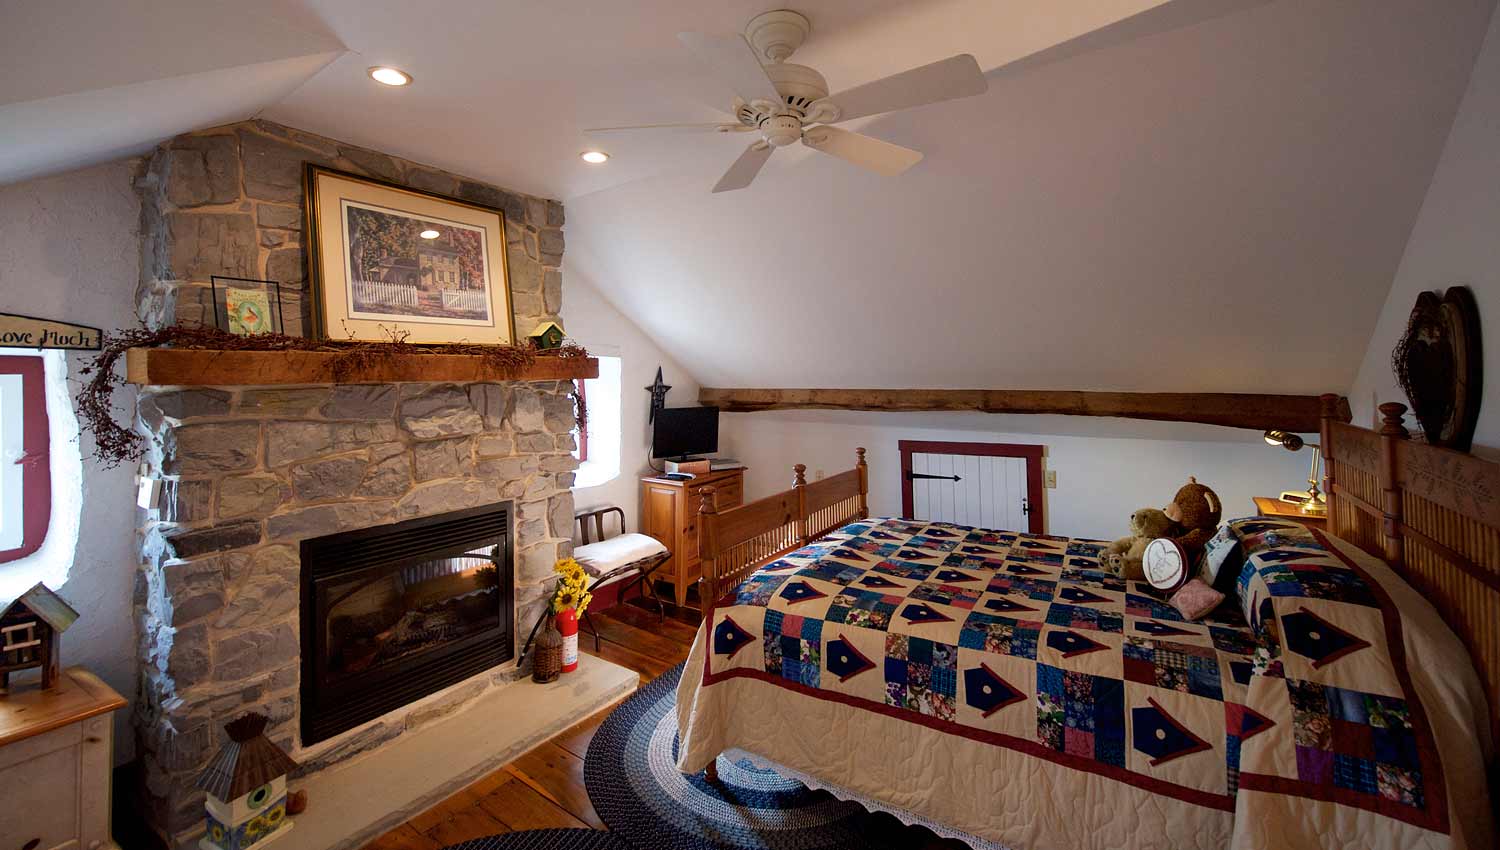 Bed and Breakfast Guest Room with Fireplace